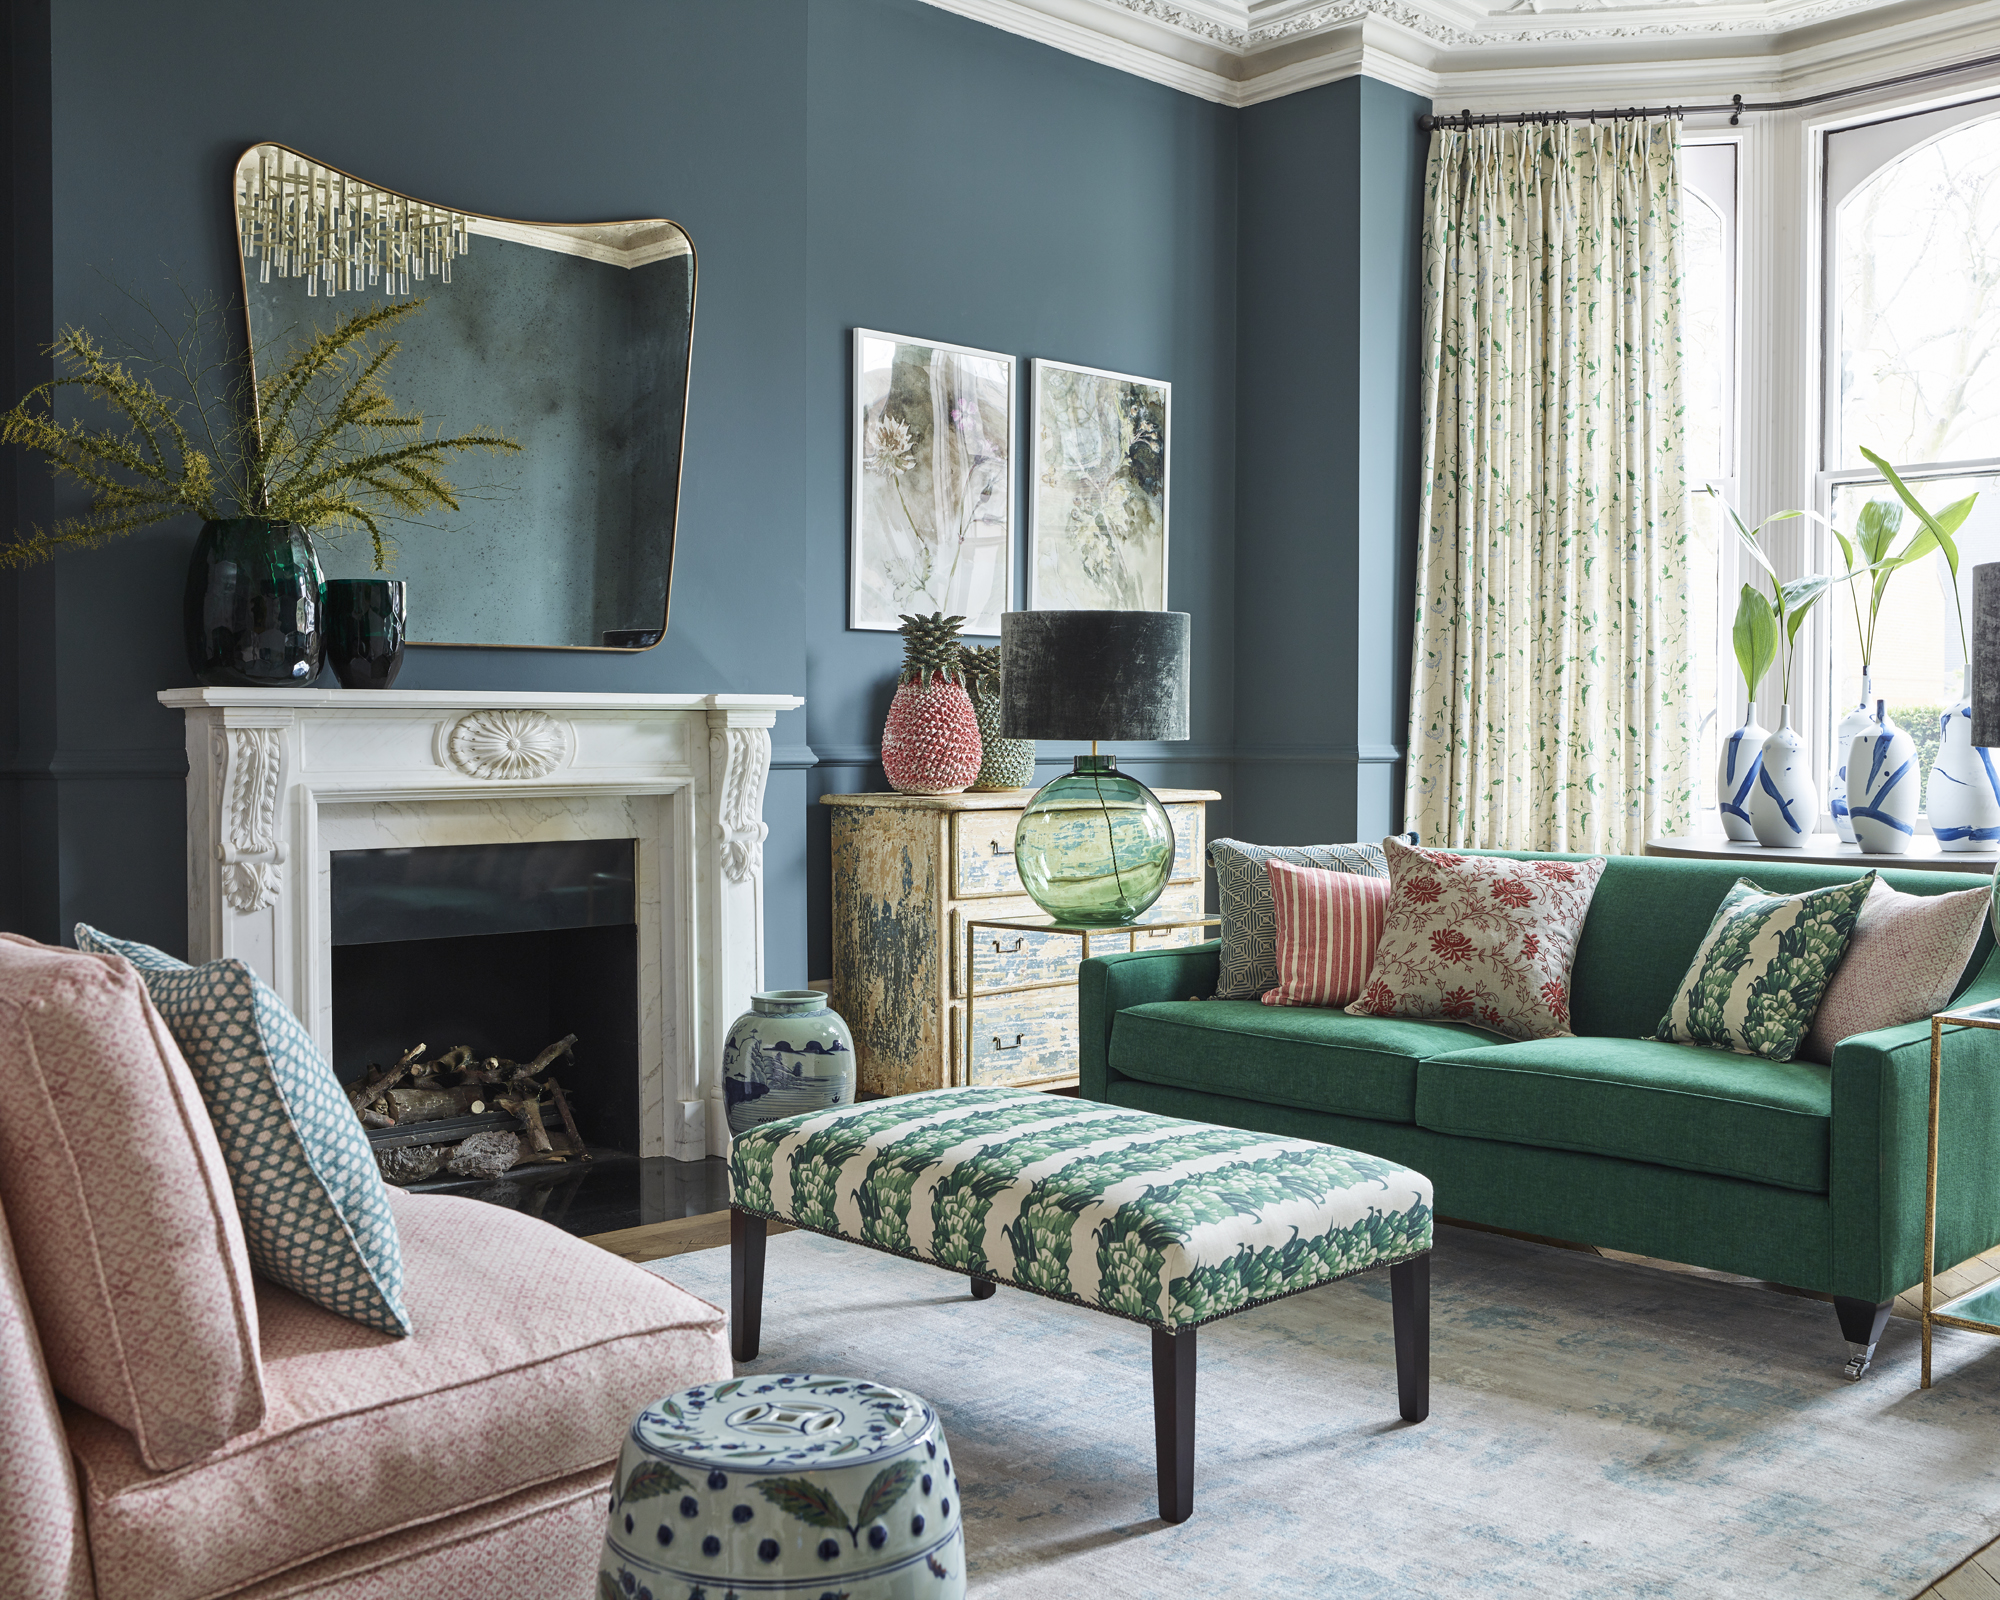 A living room mirror idea with green-blue walls and a bowed shaped mirror above fireplace